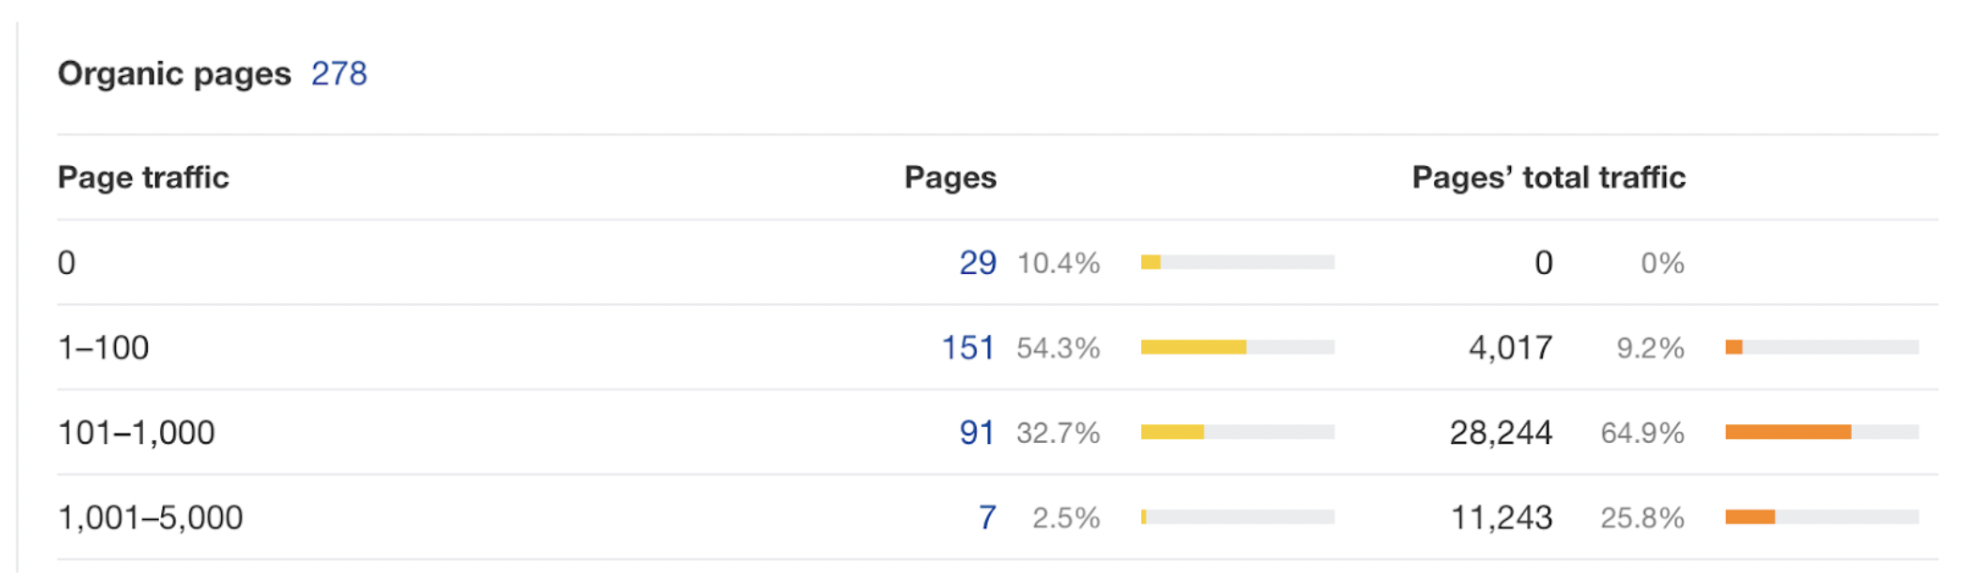 2.5% of these pages (7 pages) bring in 25% of the traffic to the glossary section, but 91 of the pages bring in 100-1000 visits per month